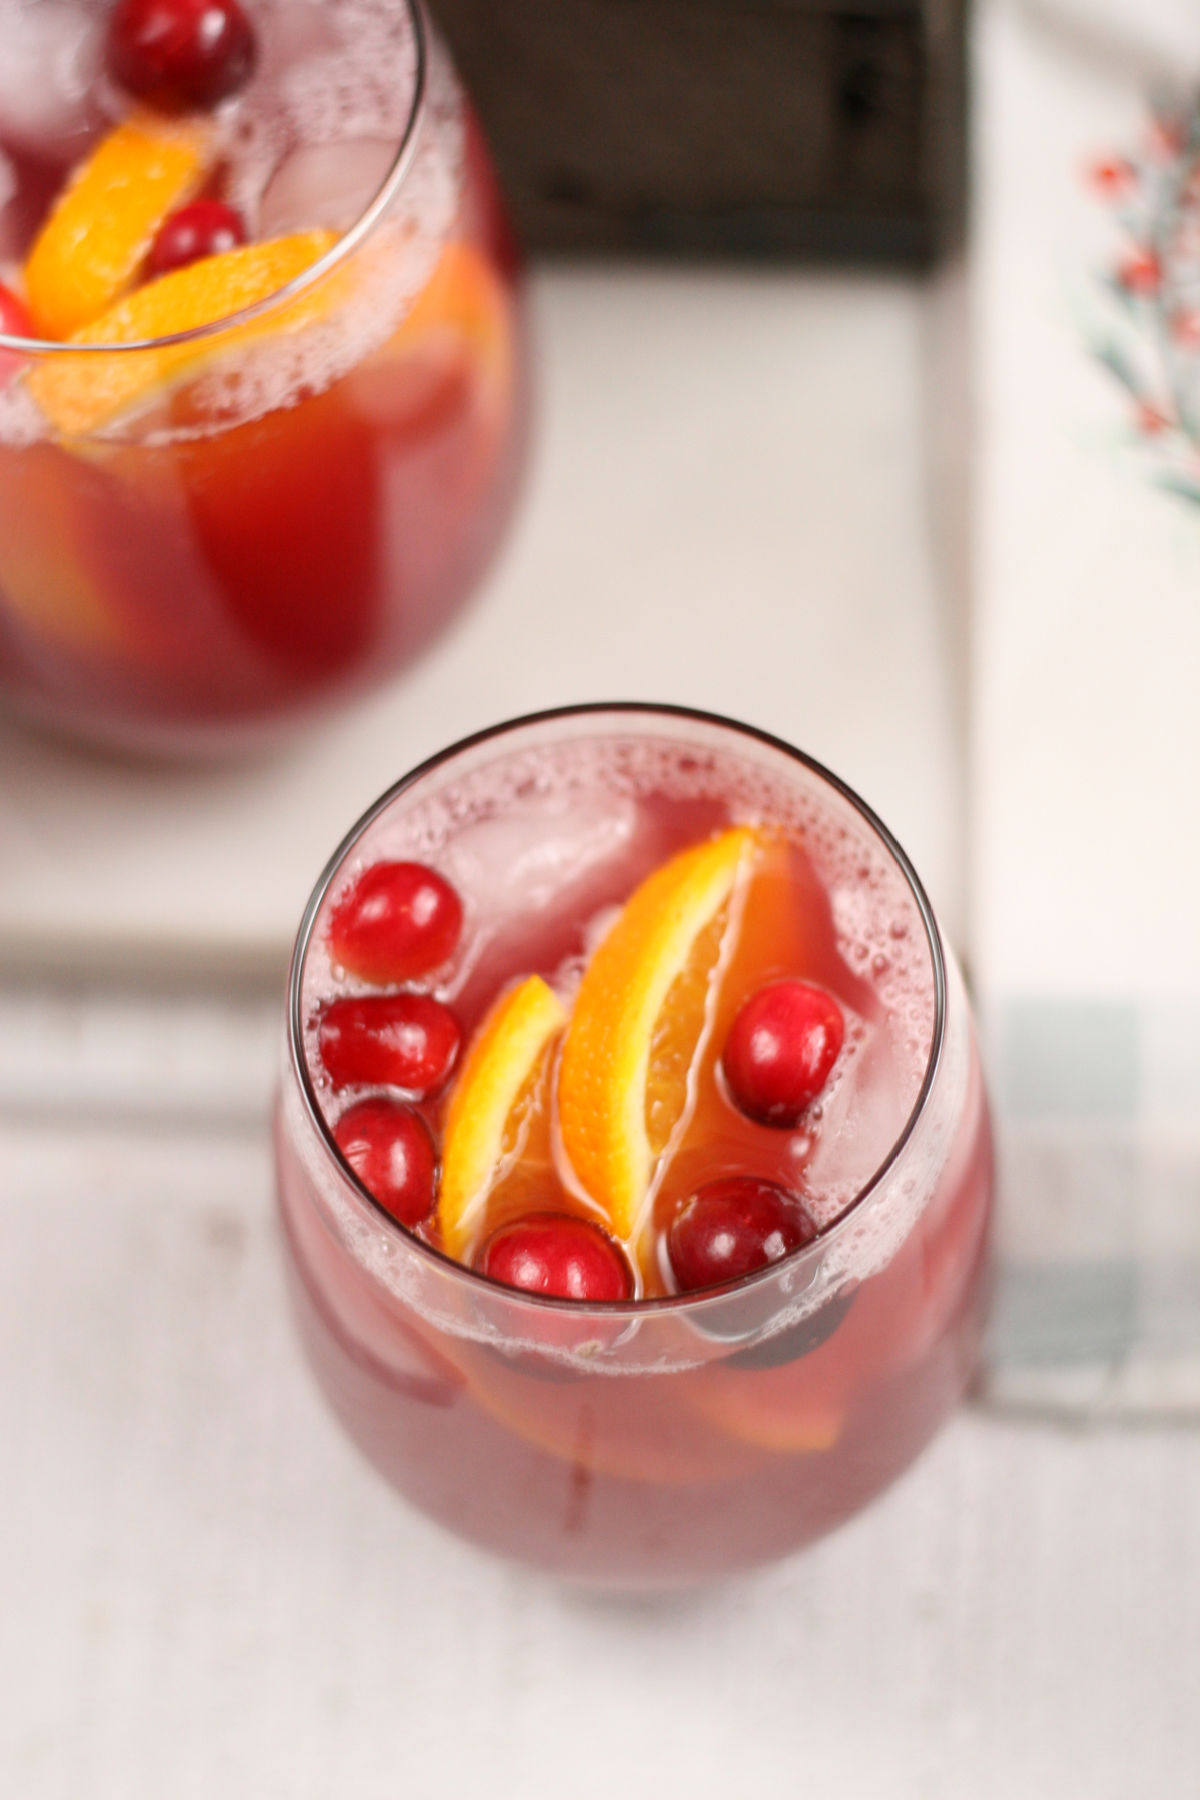 Stemless wine glass with holiday punch, ice cubes, cranberries and orange slices.